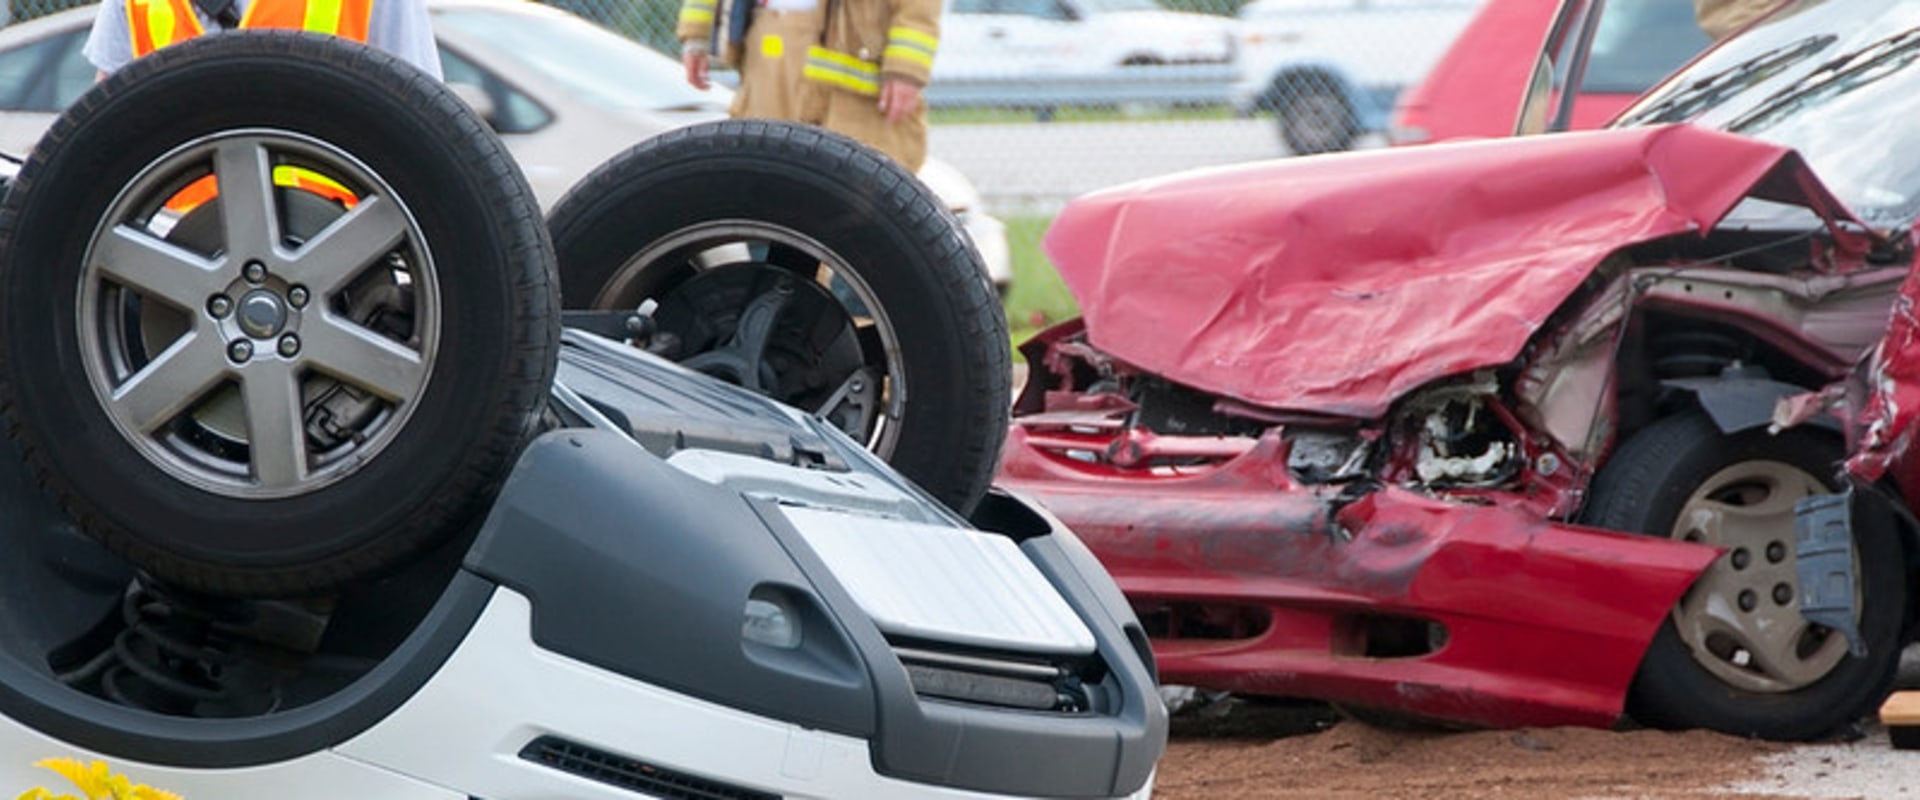 How Vehicle Accidents Affect Criminal And Civil Cases In Atlanta